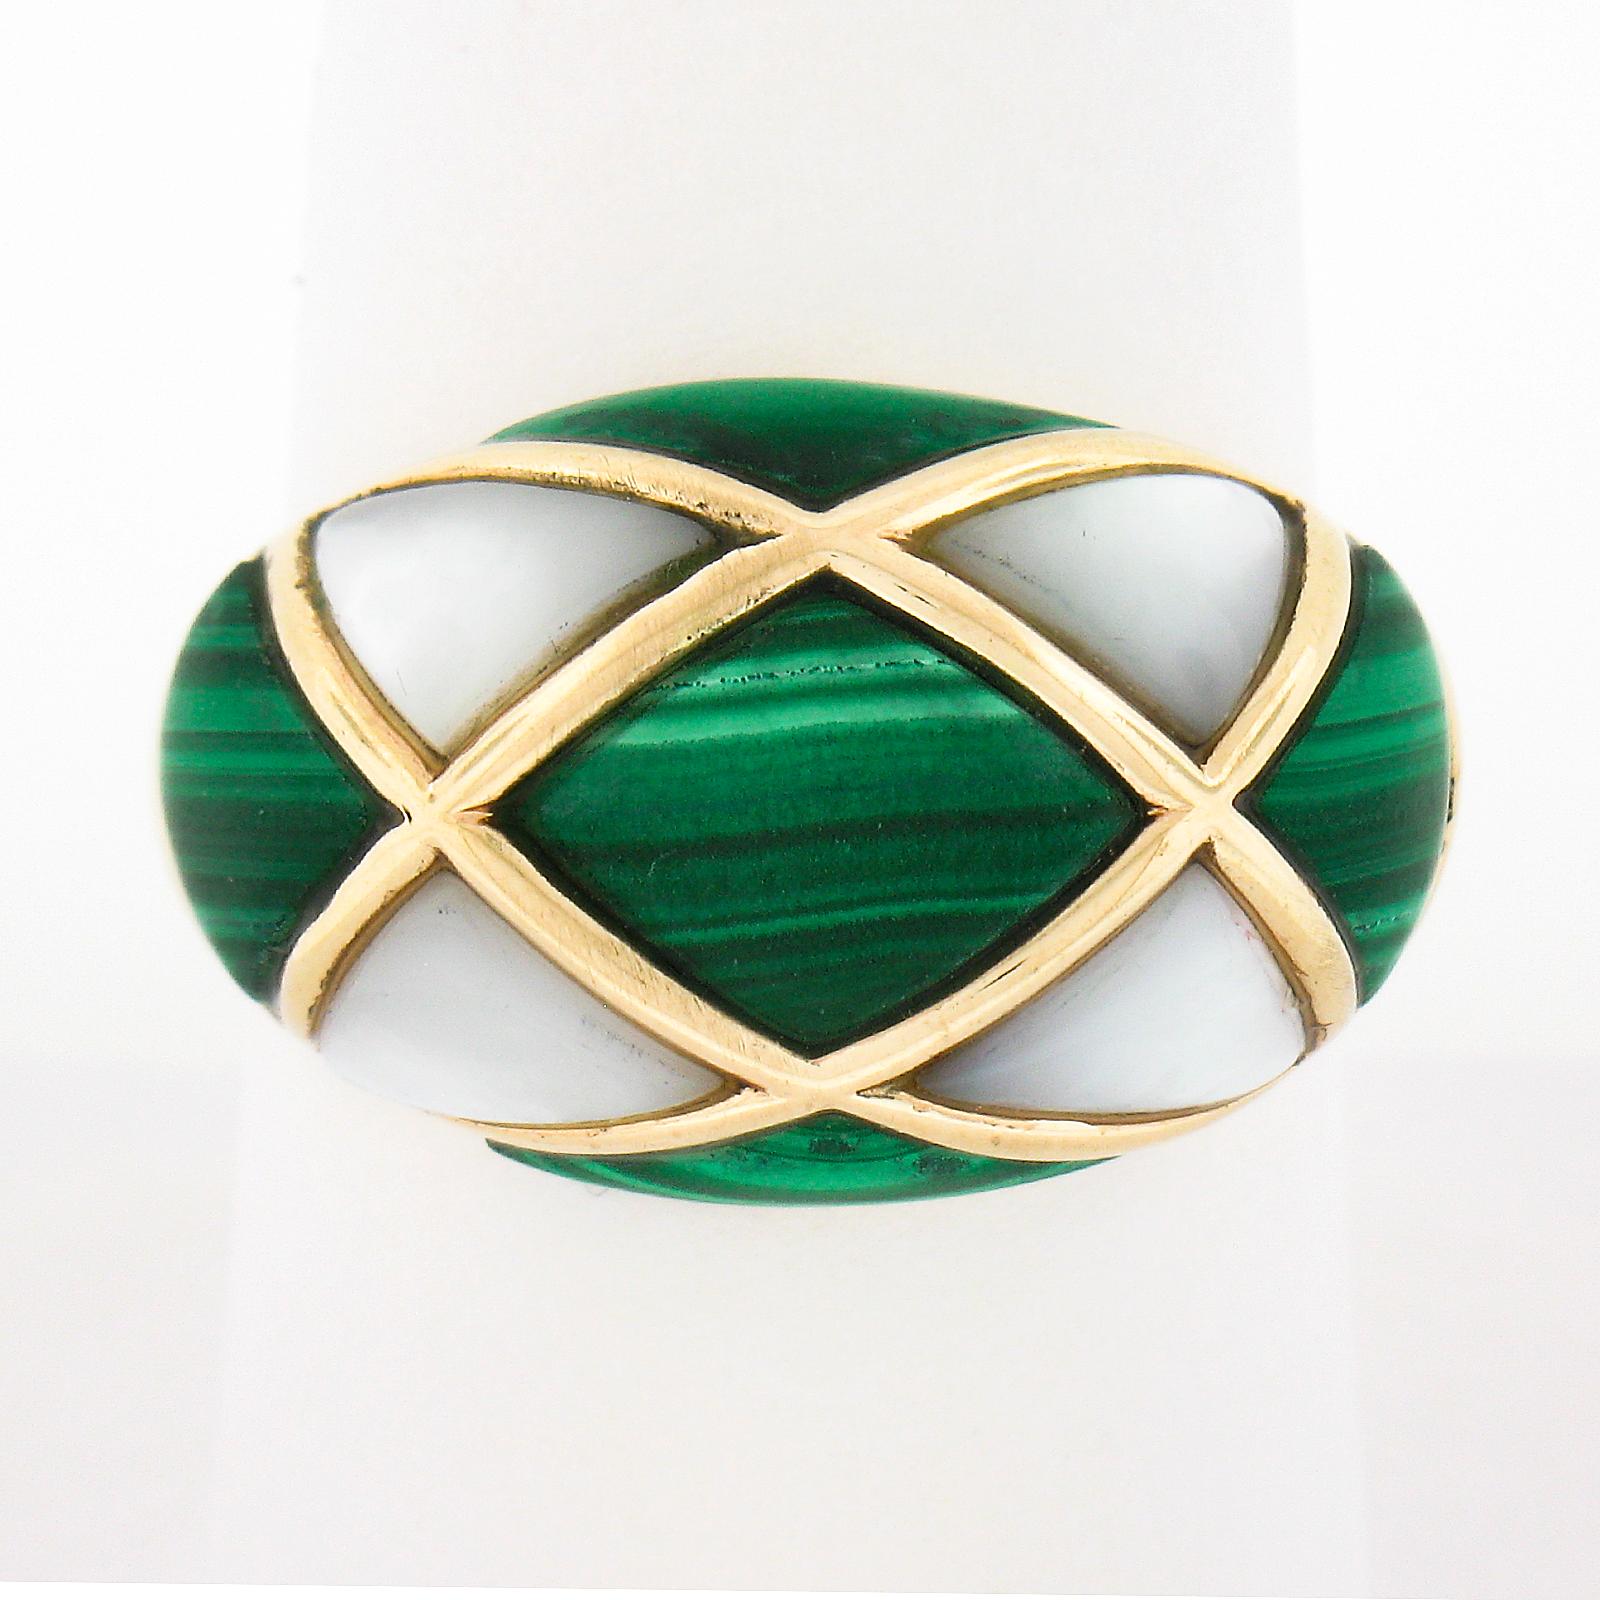 Here we have an absolutely magnificent cocktail ring that was crafted from solid 14k yellow gold. It features a domed top that is set with the most gorgeous natural malachite and mother of pearl stones in which have been custom cut and perfectly set